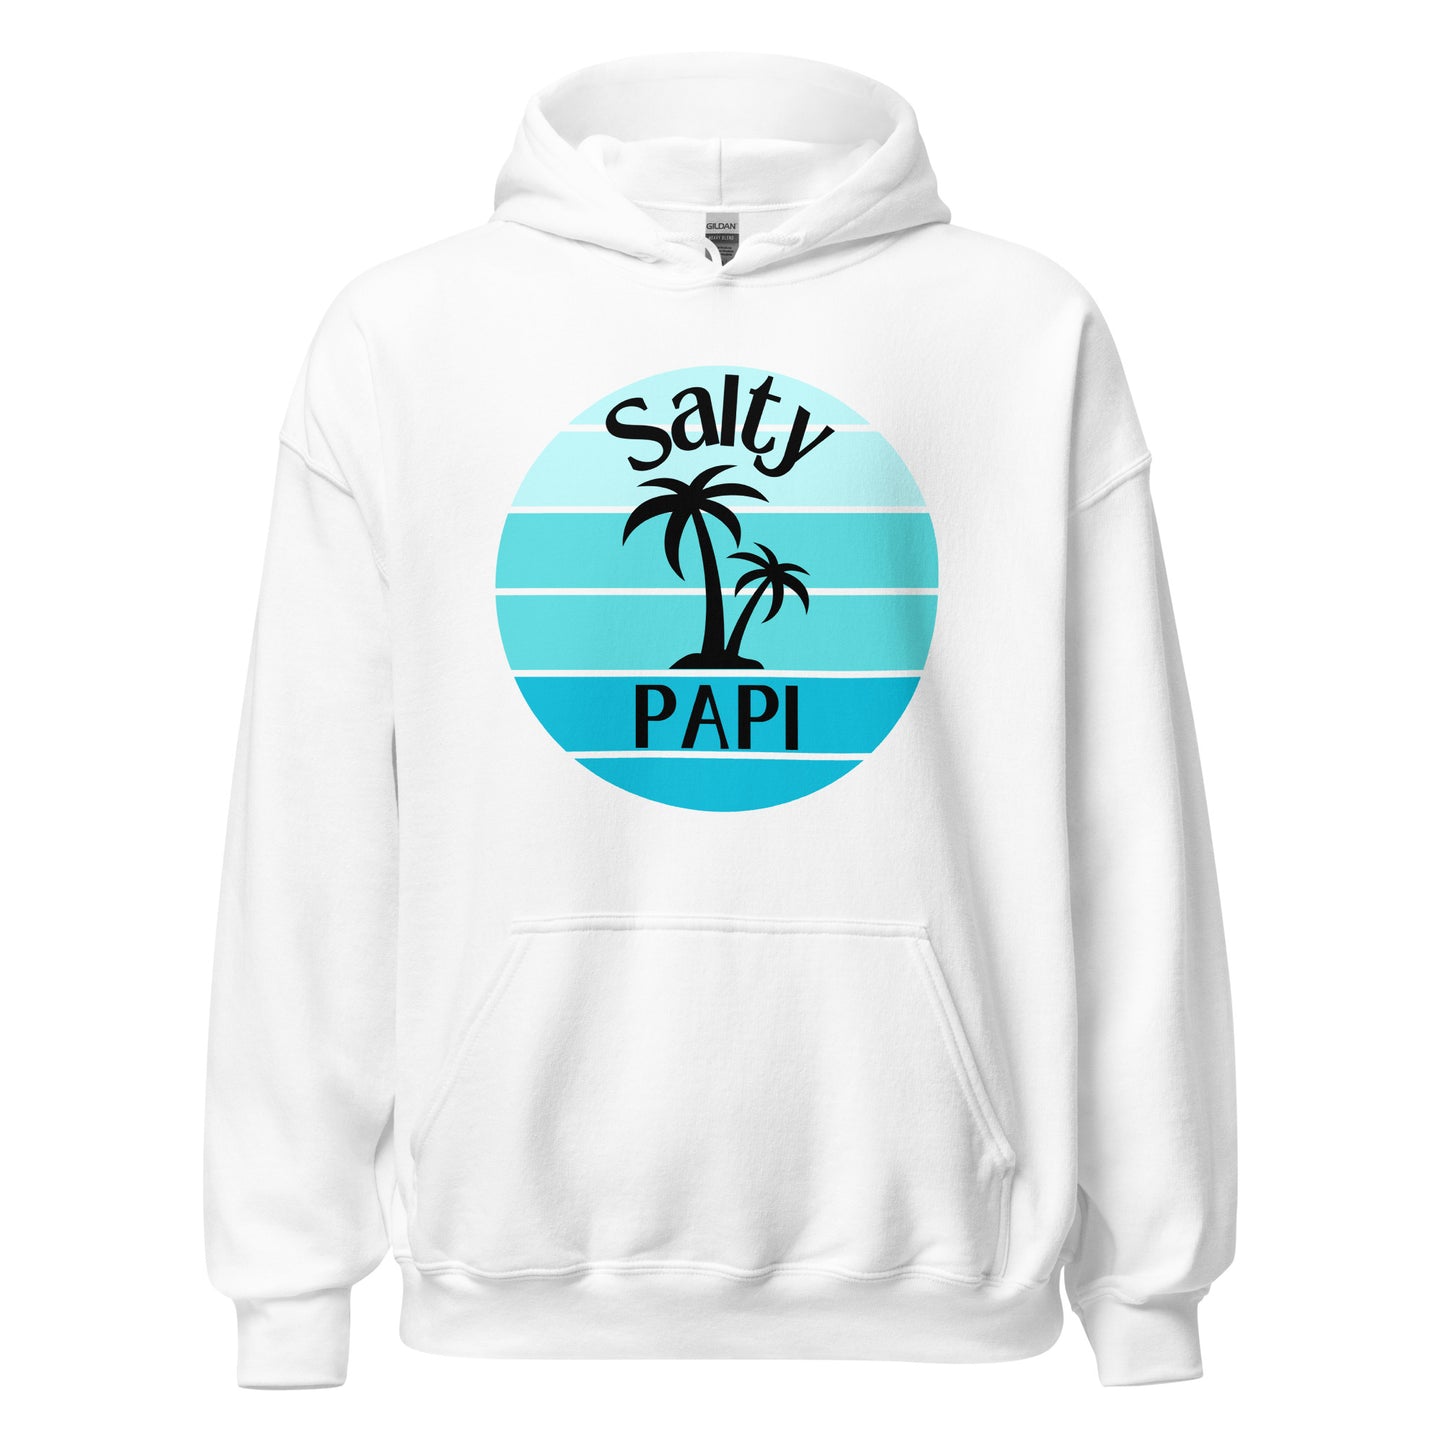 Stay Stylish and Laid-Back: Men's Premium Hoodie with 'Salty Papi' Design